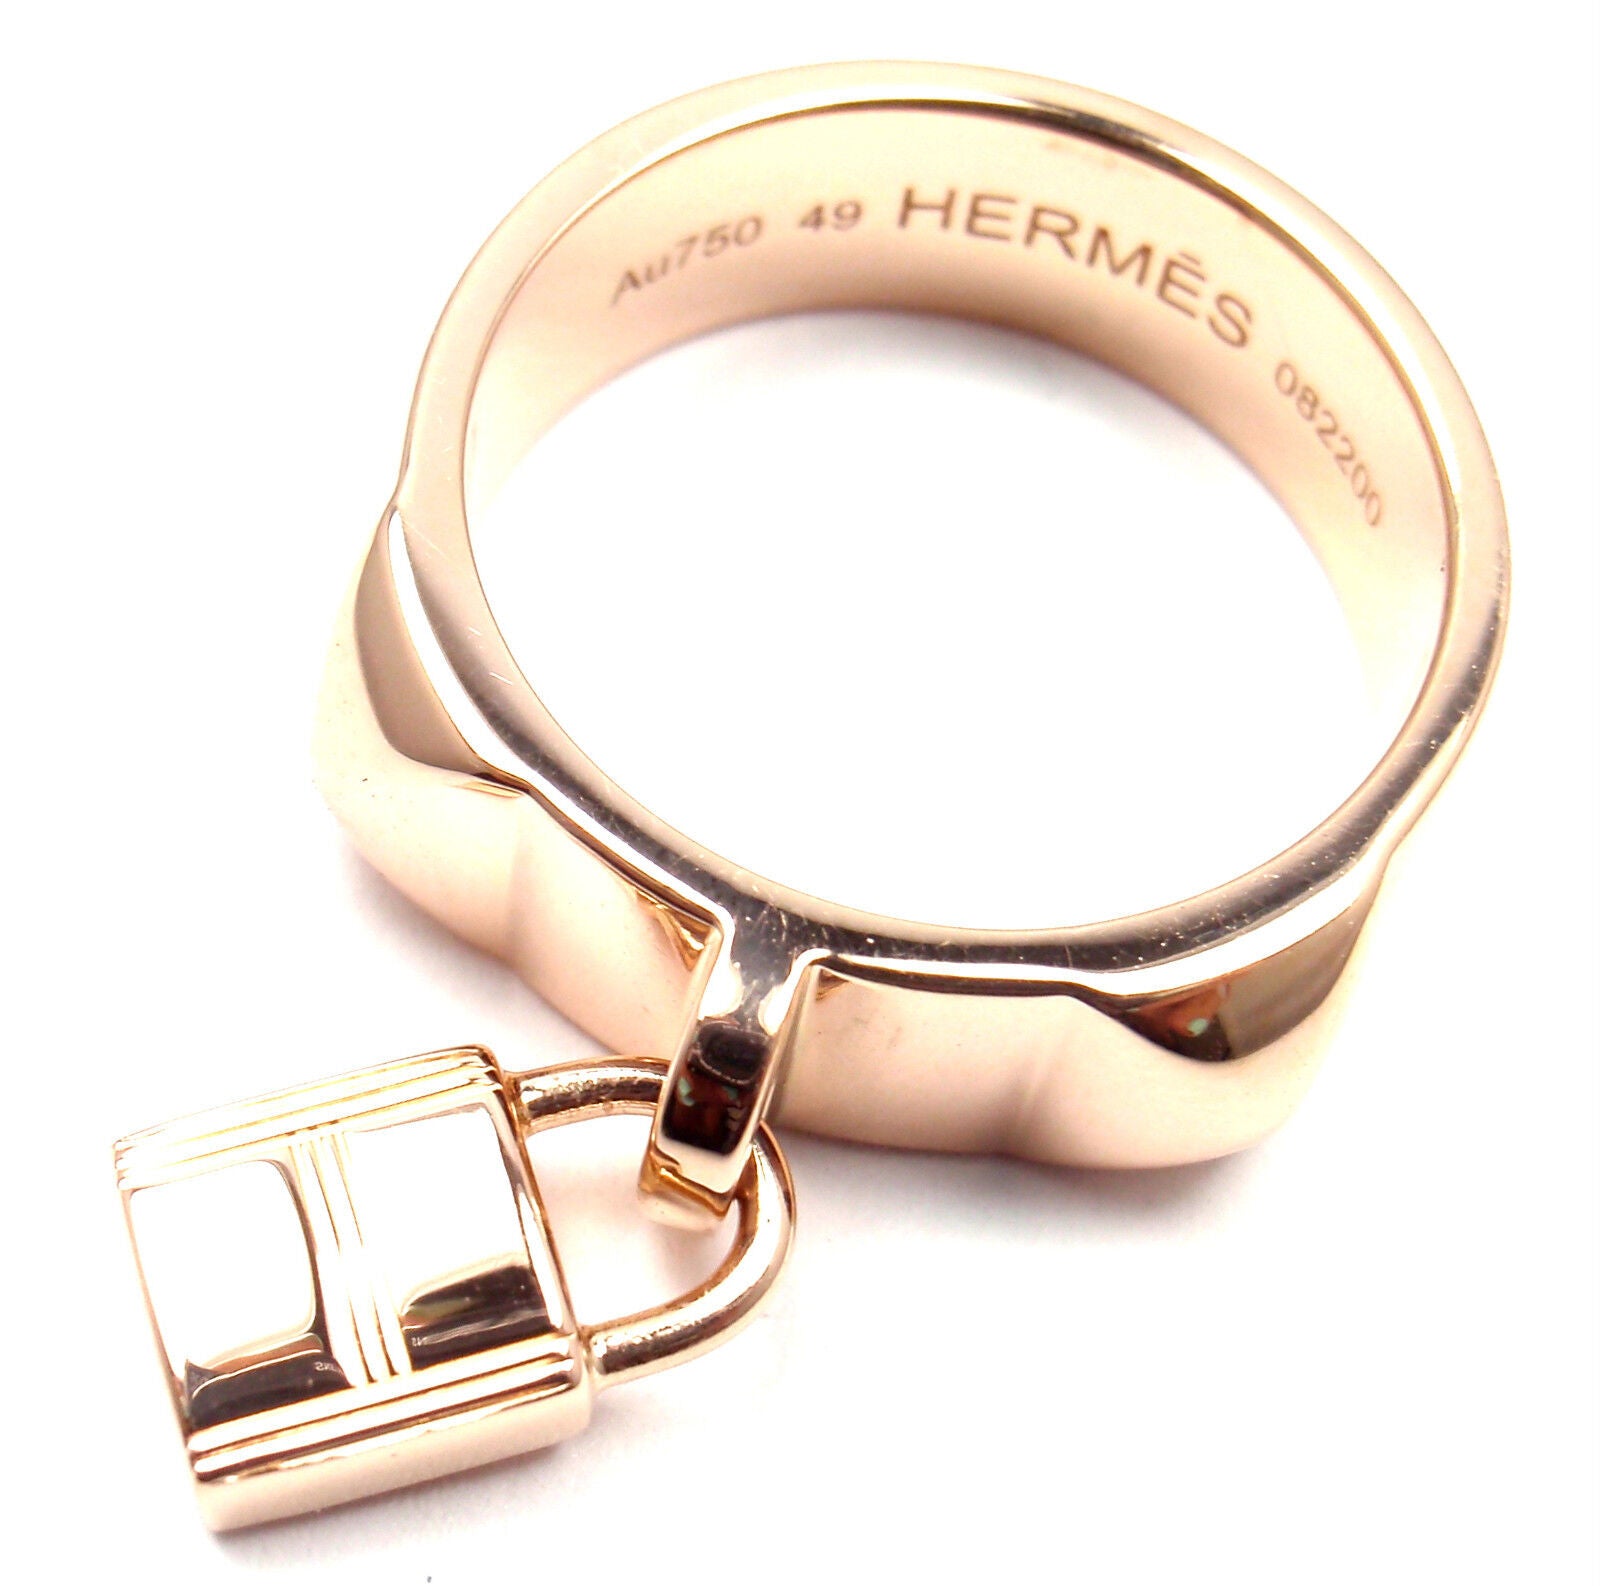 Hermes Jewelry & Watches:Fine Jewelry:Rings Authentic! Hermes 18k Rose Gold Collier De Chien Lock Band Ring Size 49 US 4 3/4